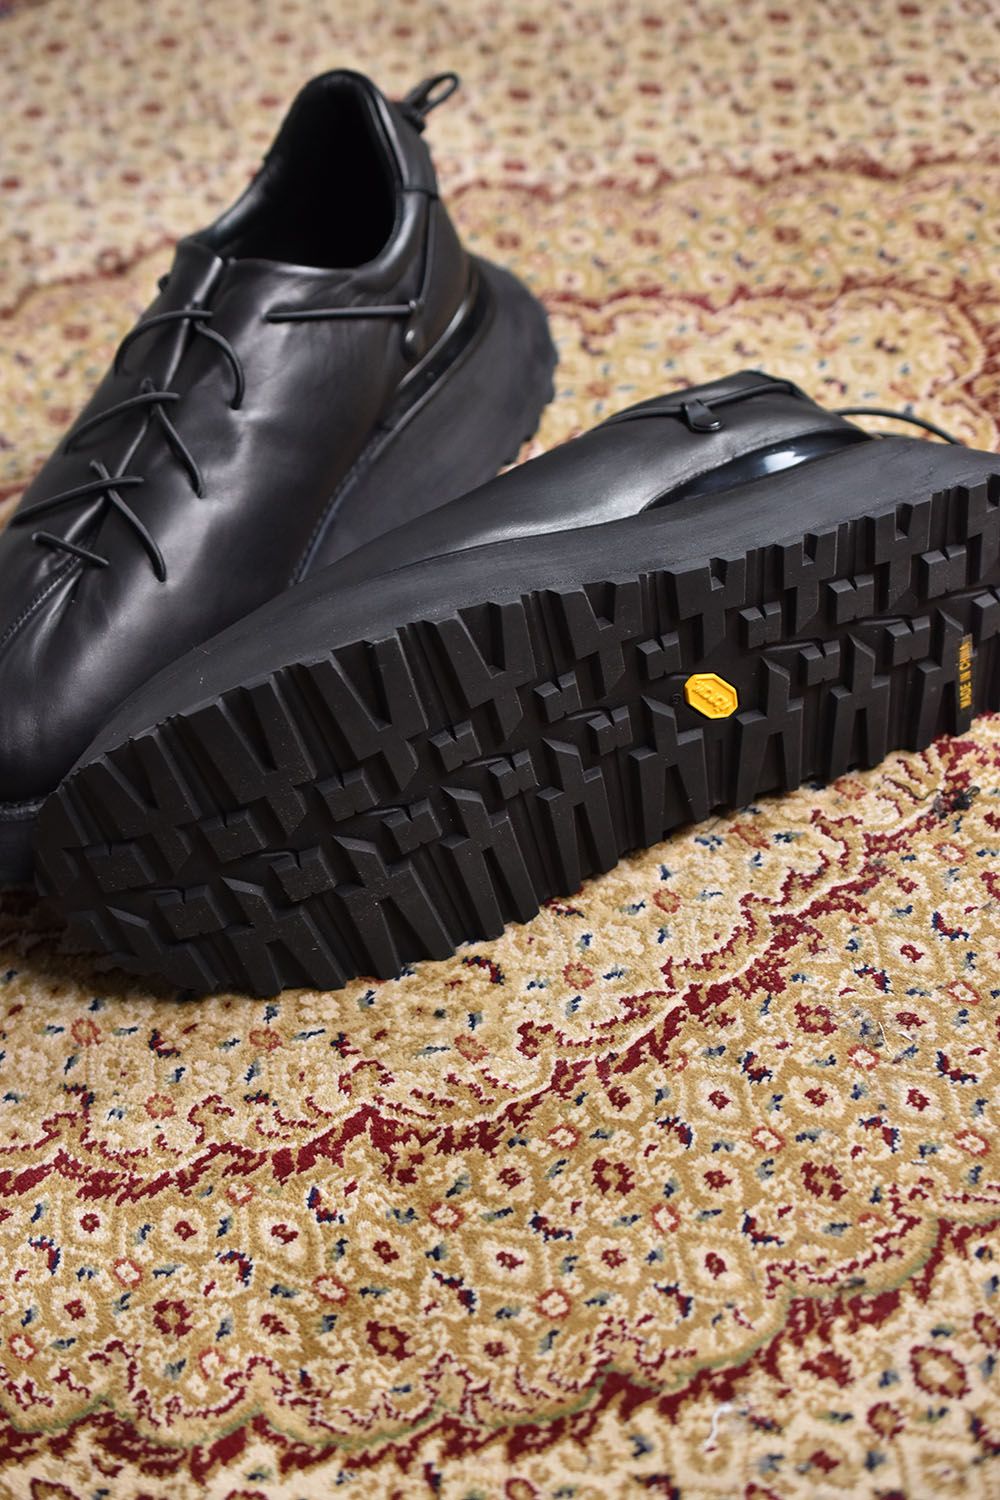 Leather Lace Up Shoes"Black"/レザーレースアップシューズ"ブラック"